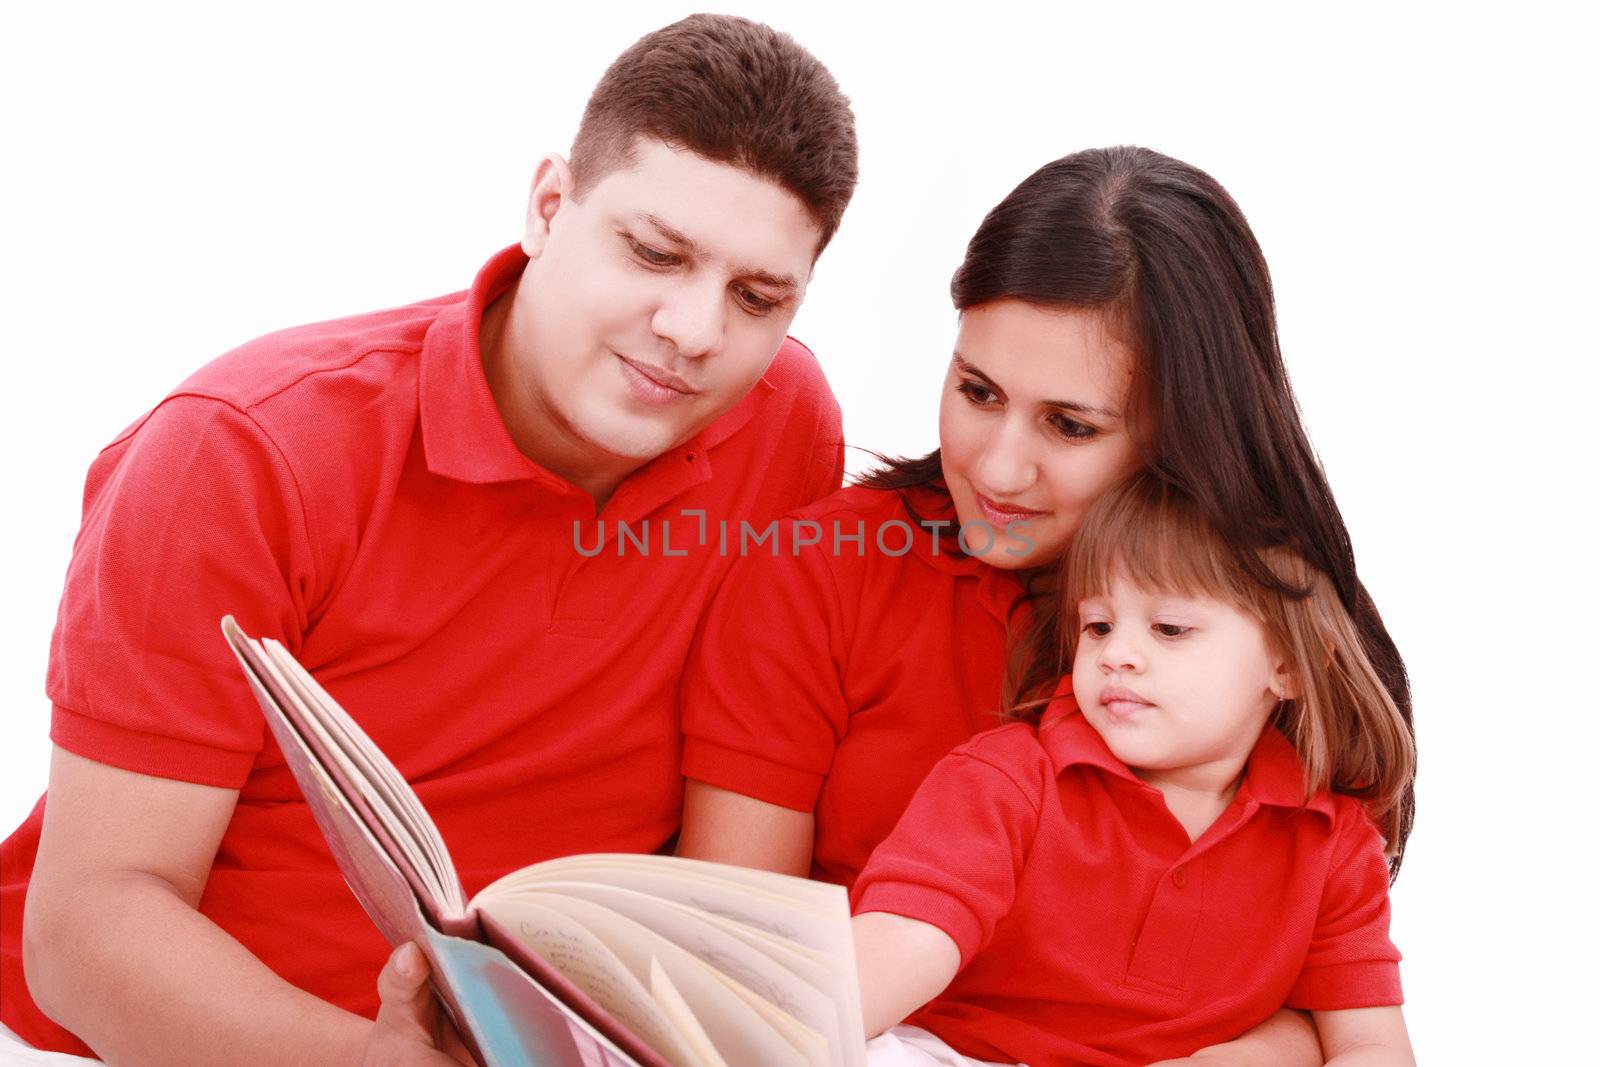 Family sitting on floor reading book at home